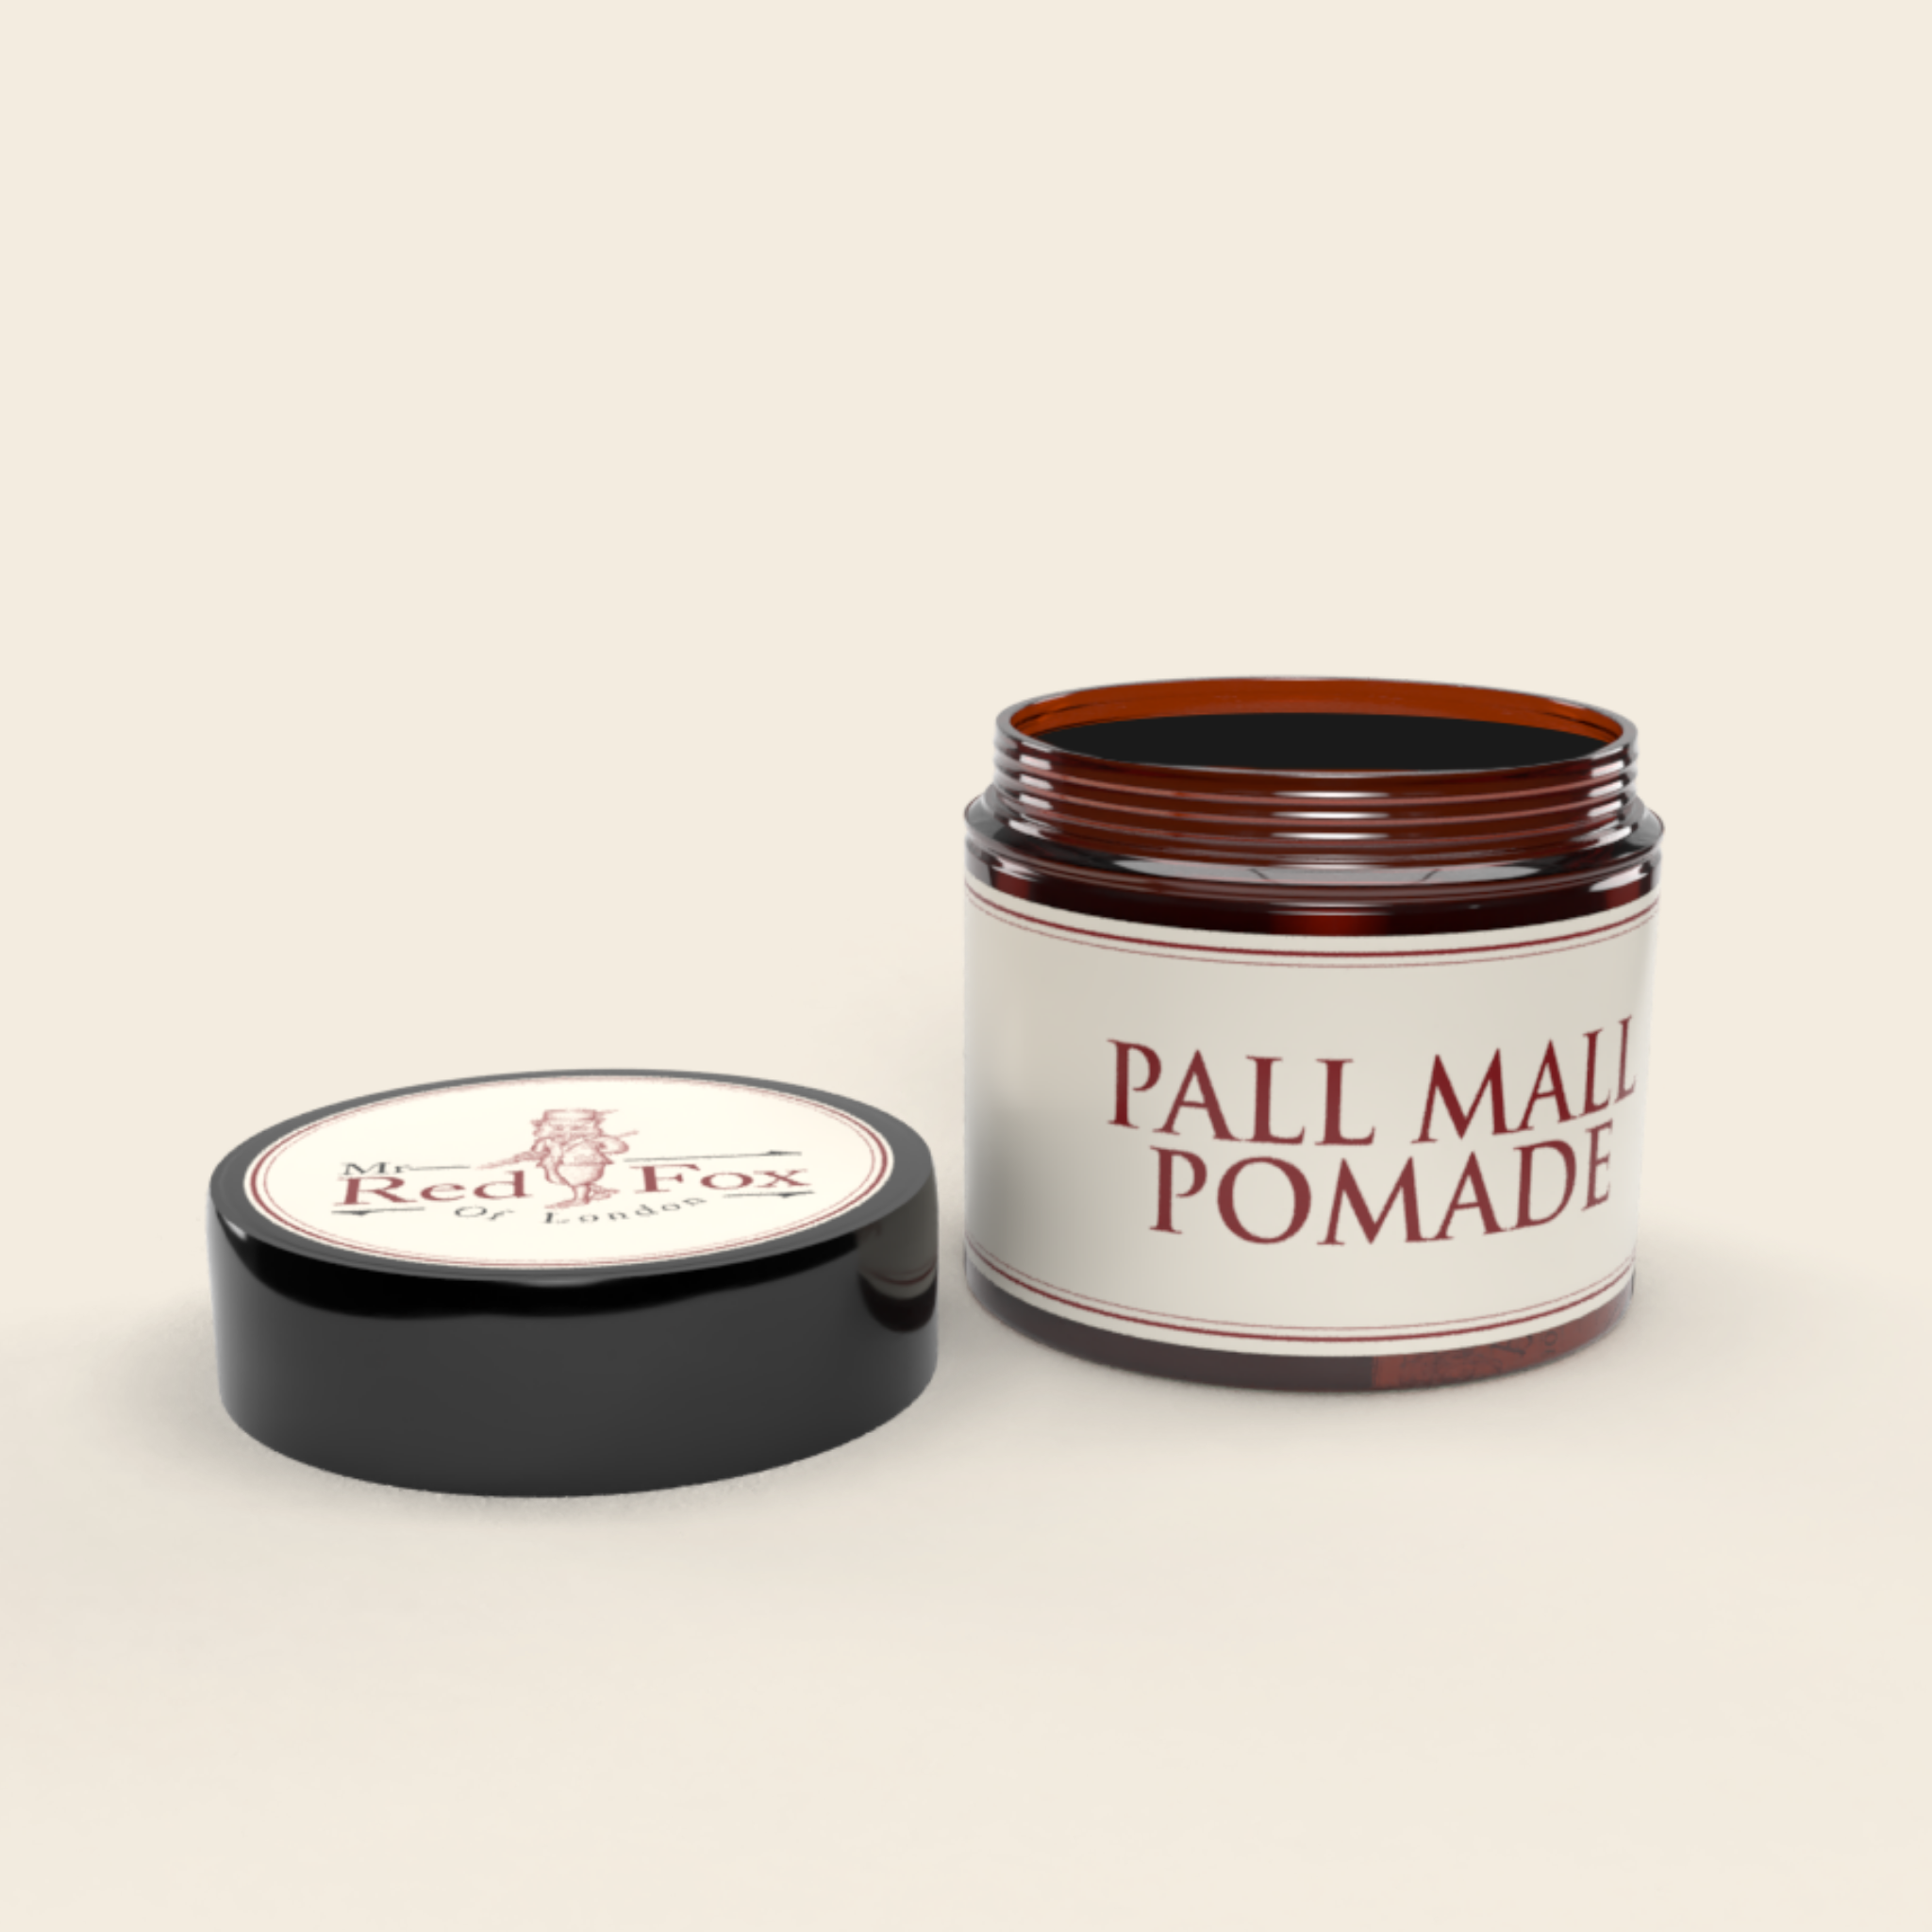 Pall Mall Pomade - Mr Red Fox Of London